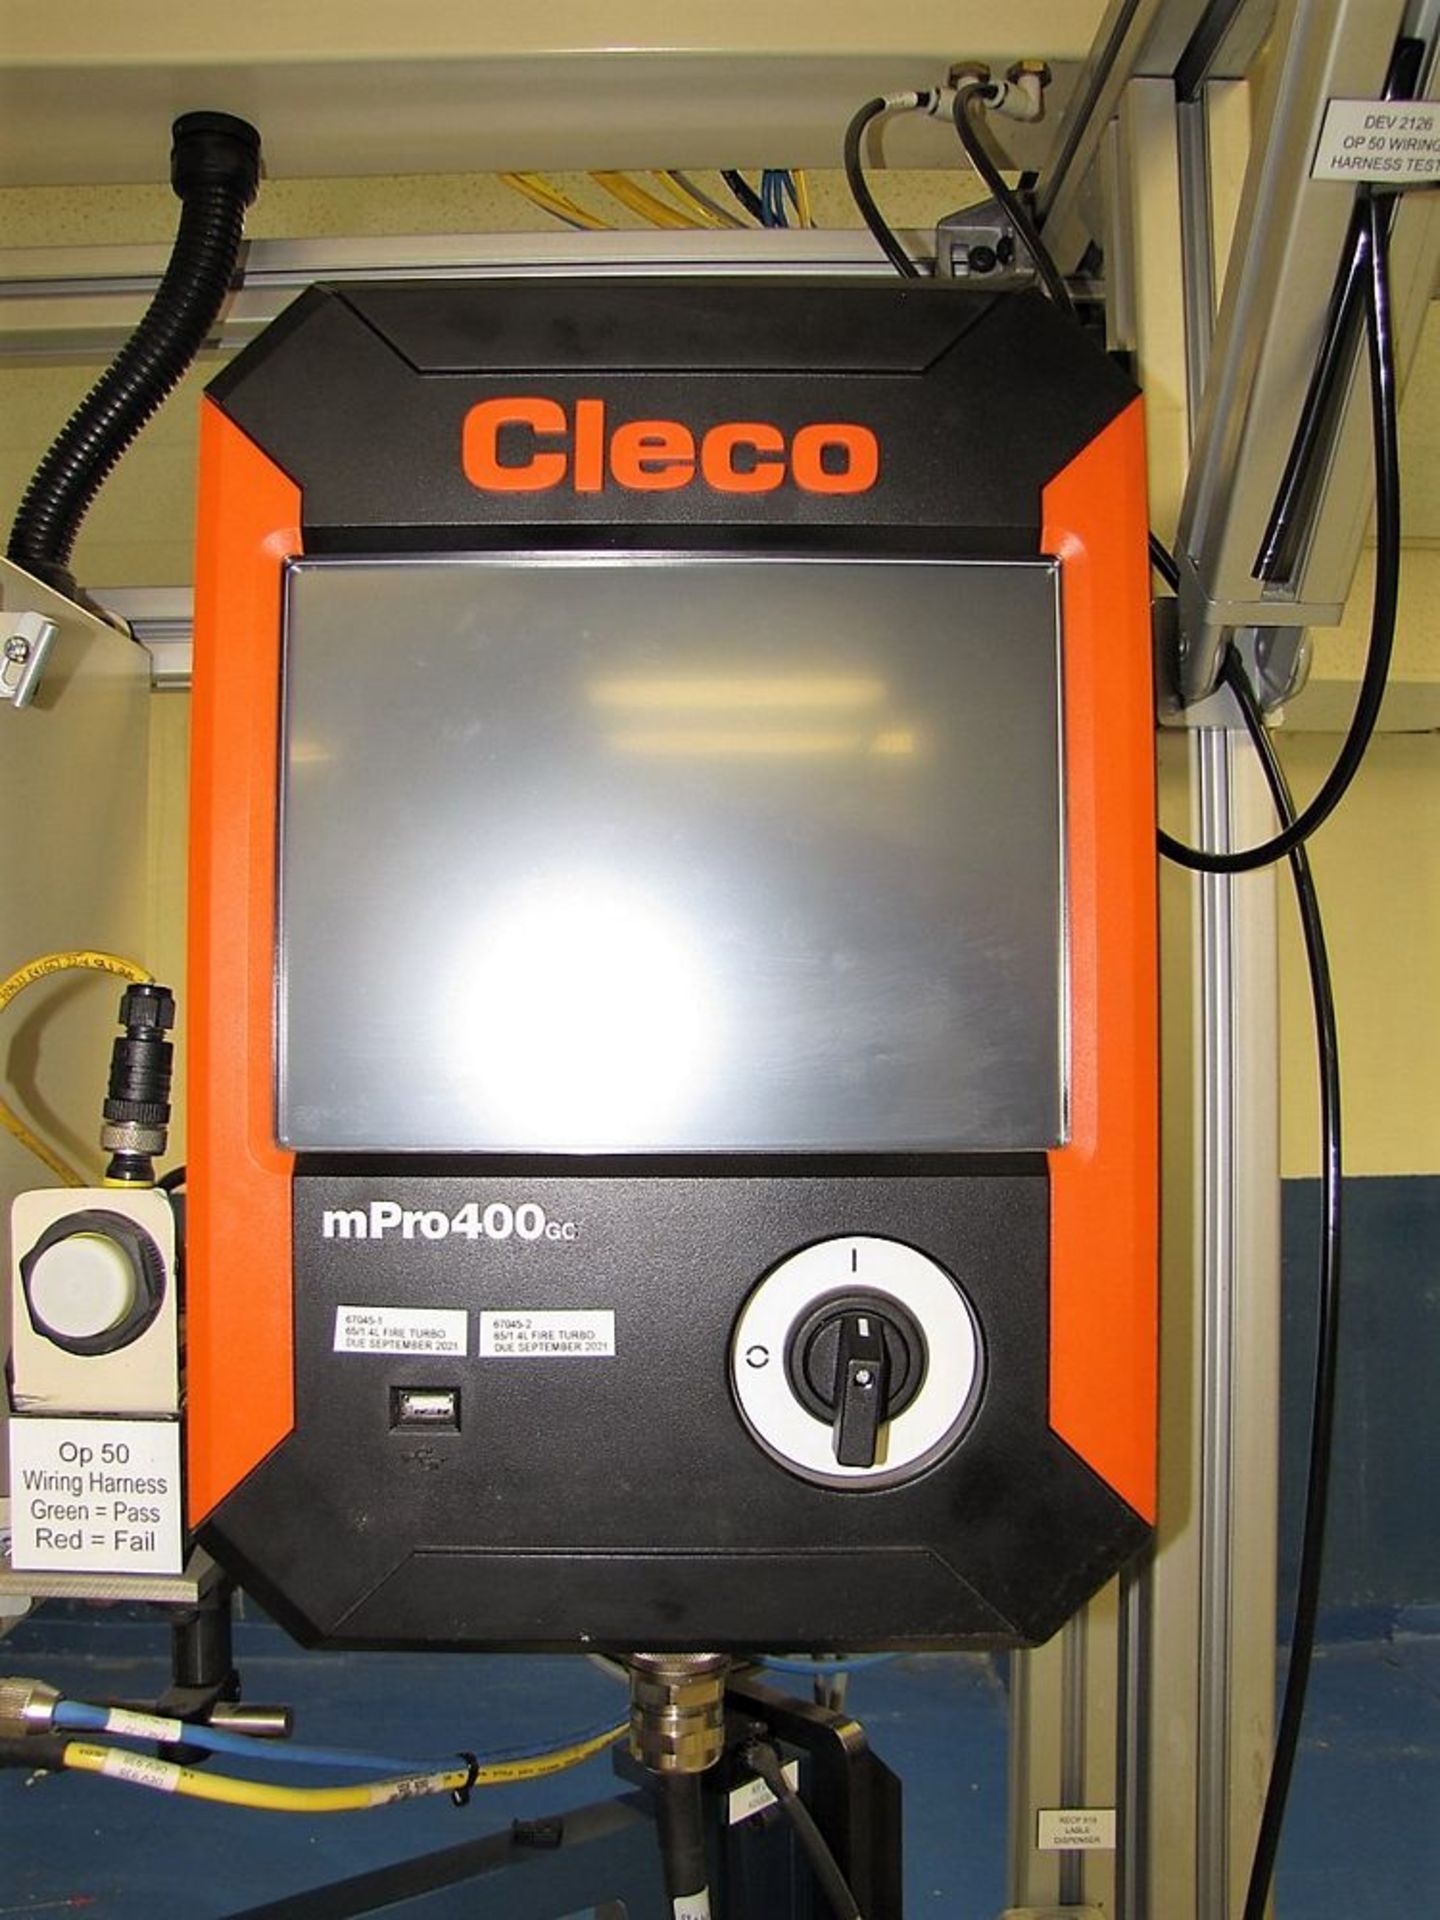 Test Station With Cleco Control - Image 3 of 3